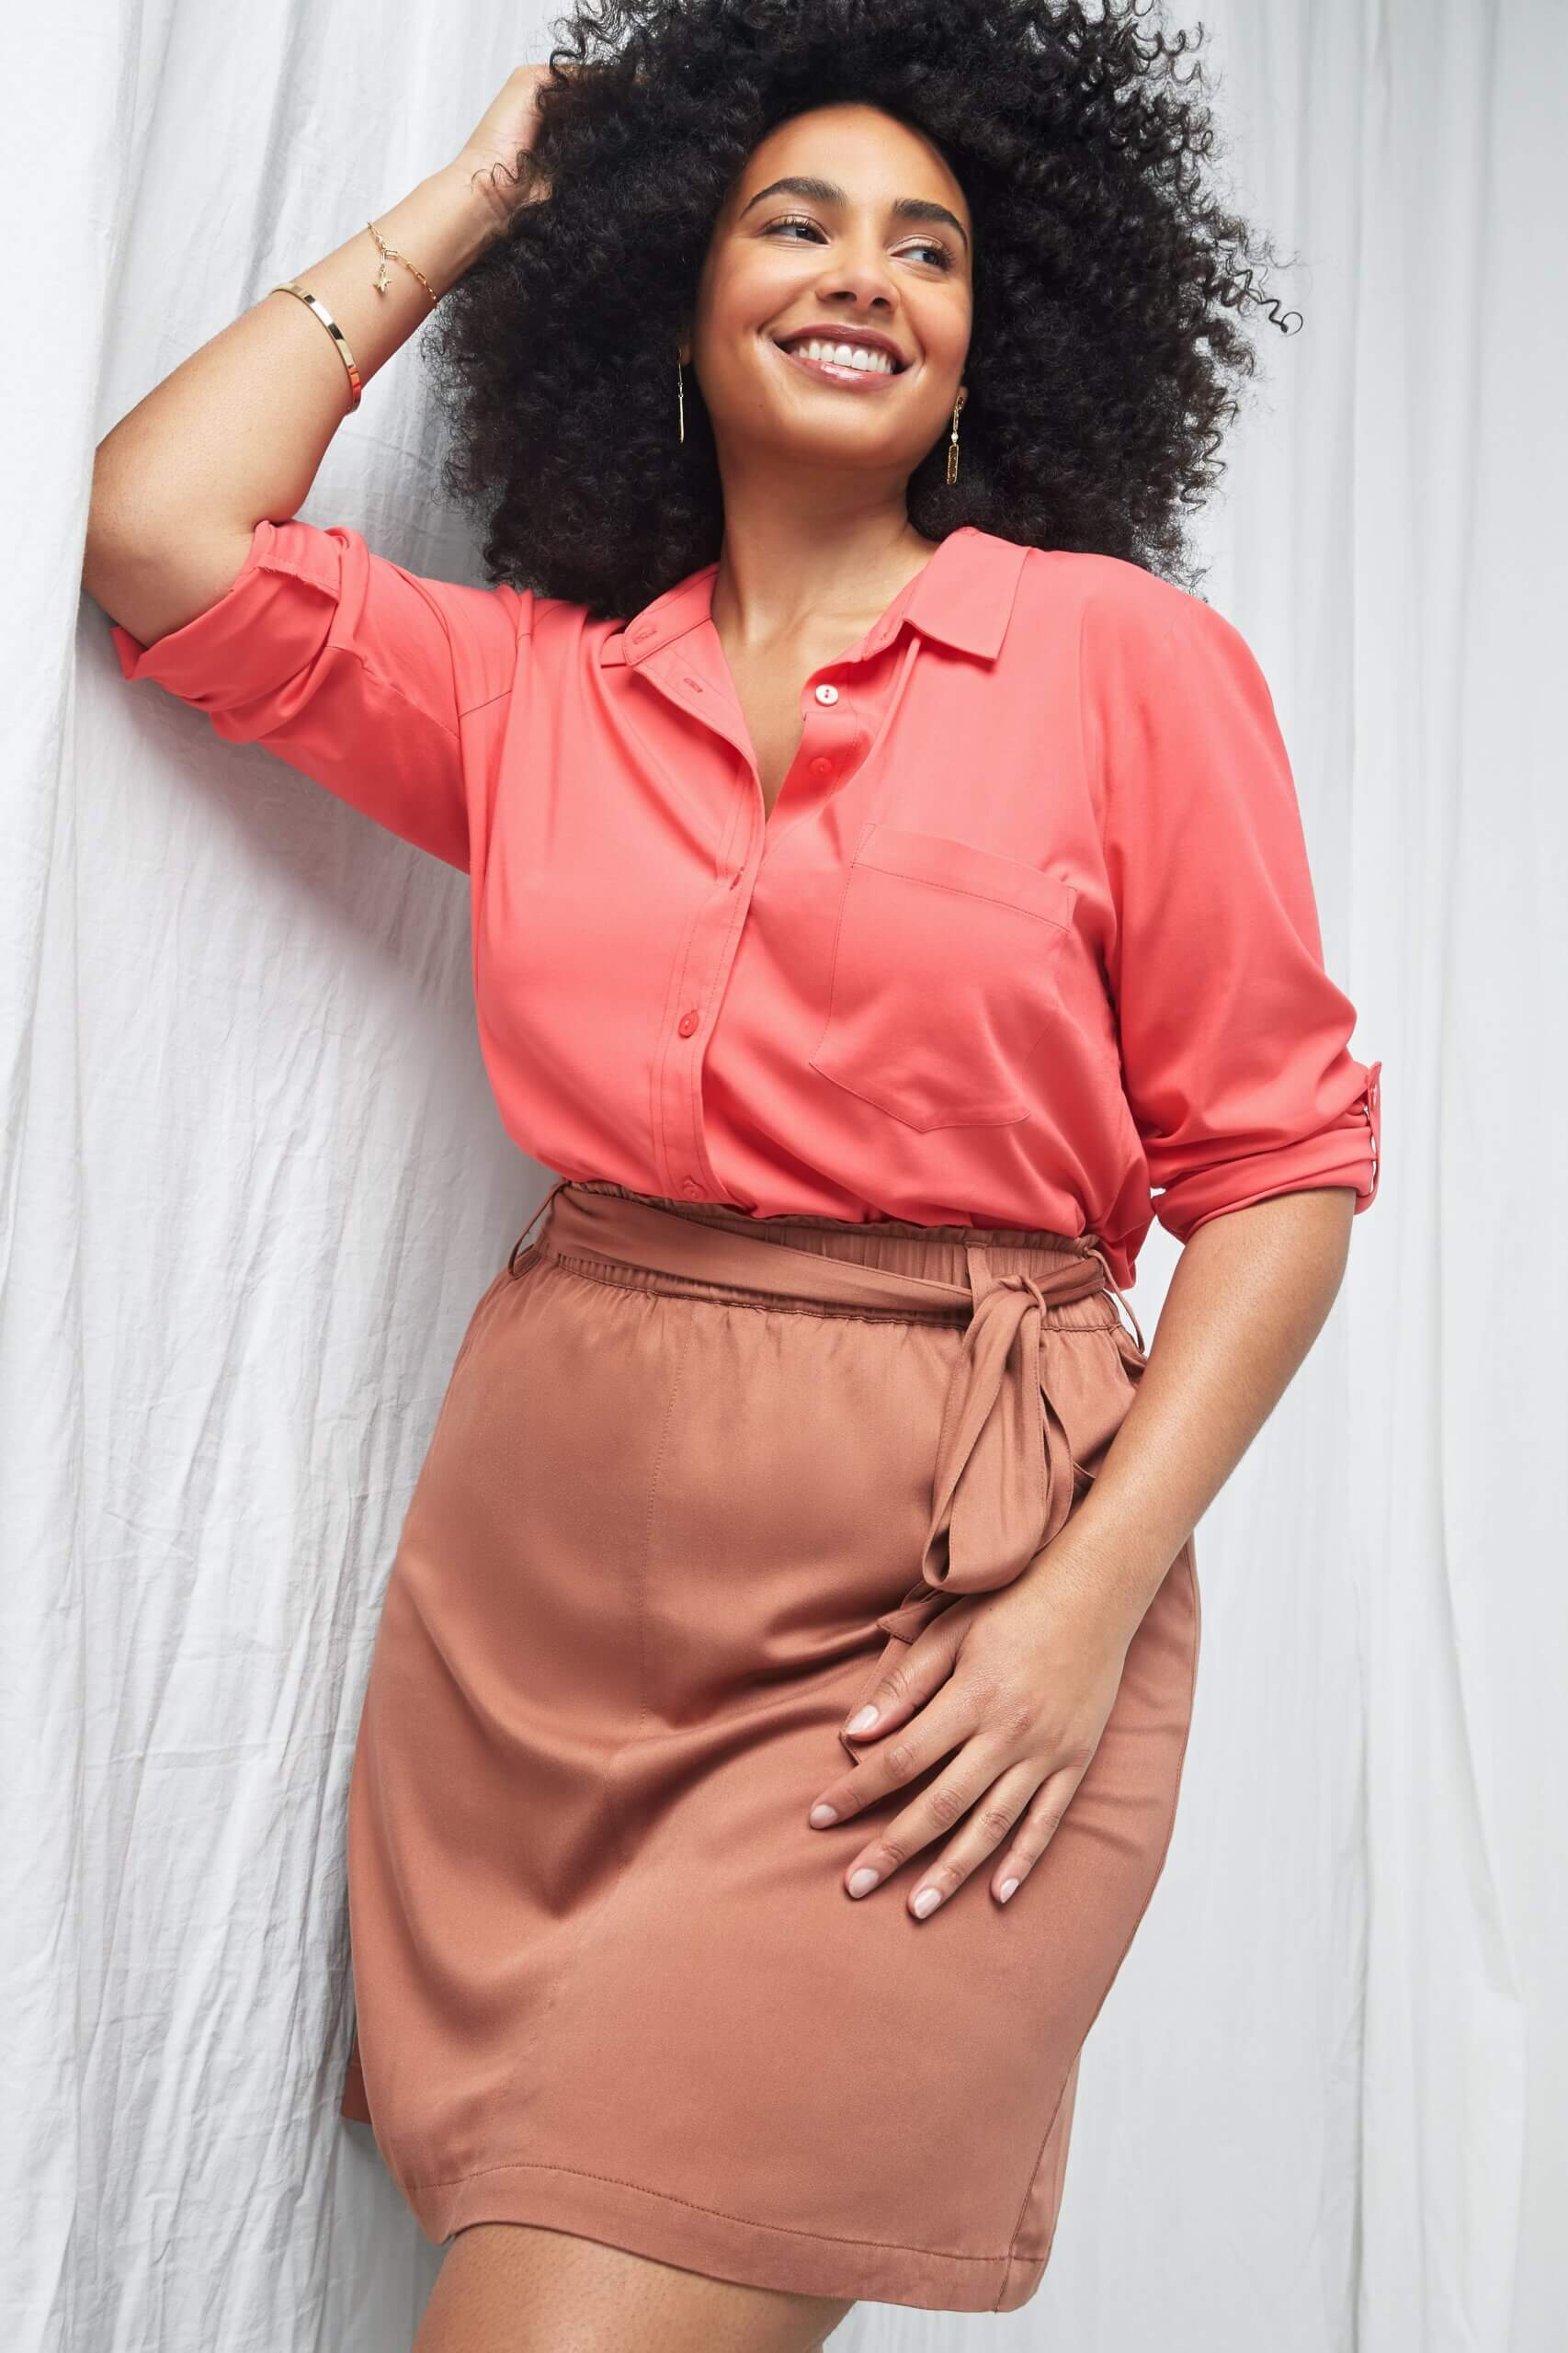 Simple tricks and tips to style plus-size clothing